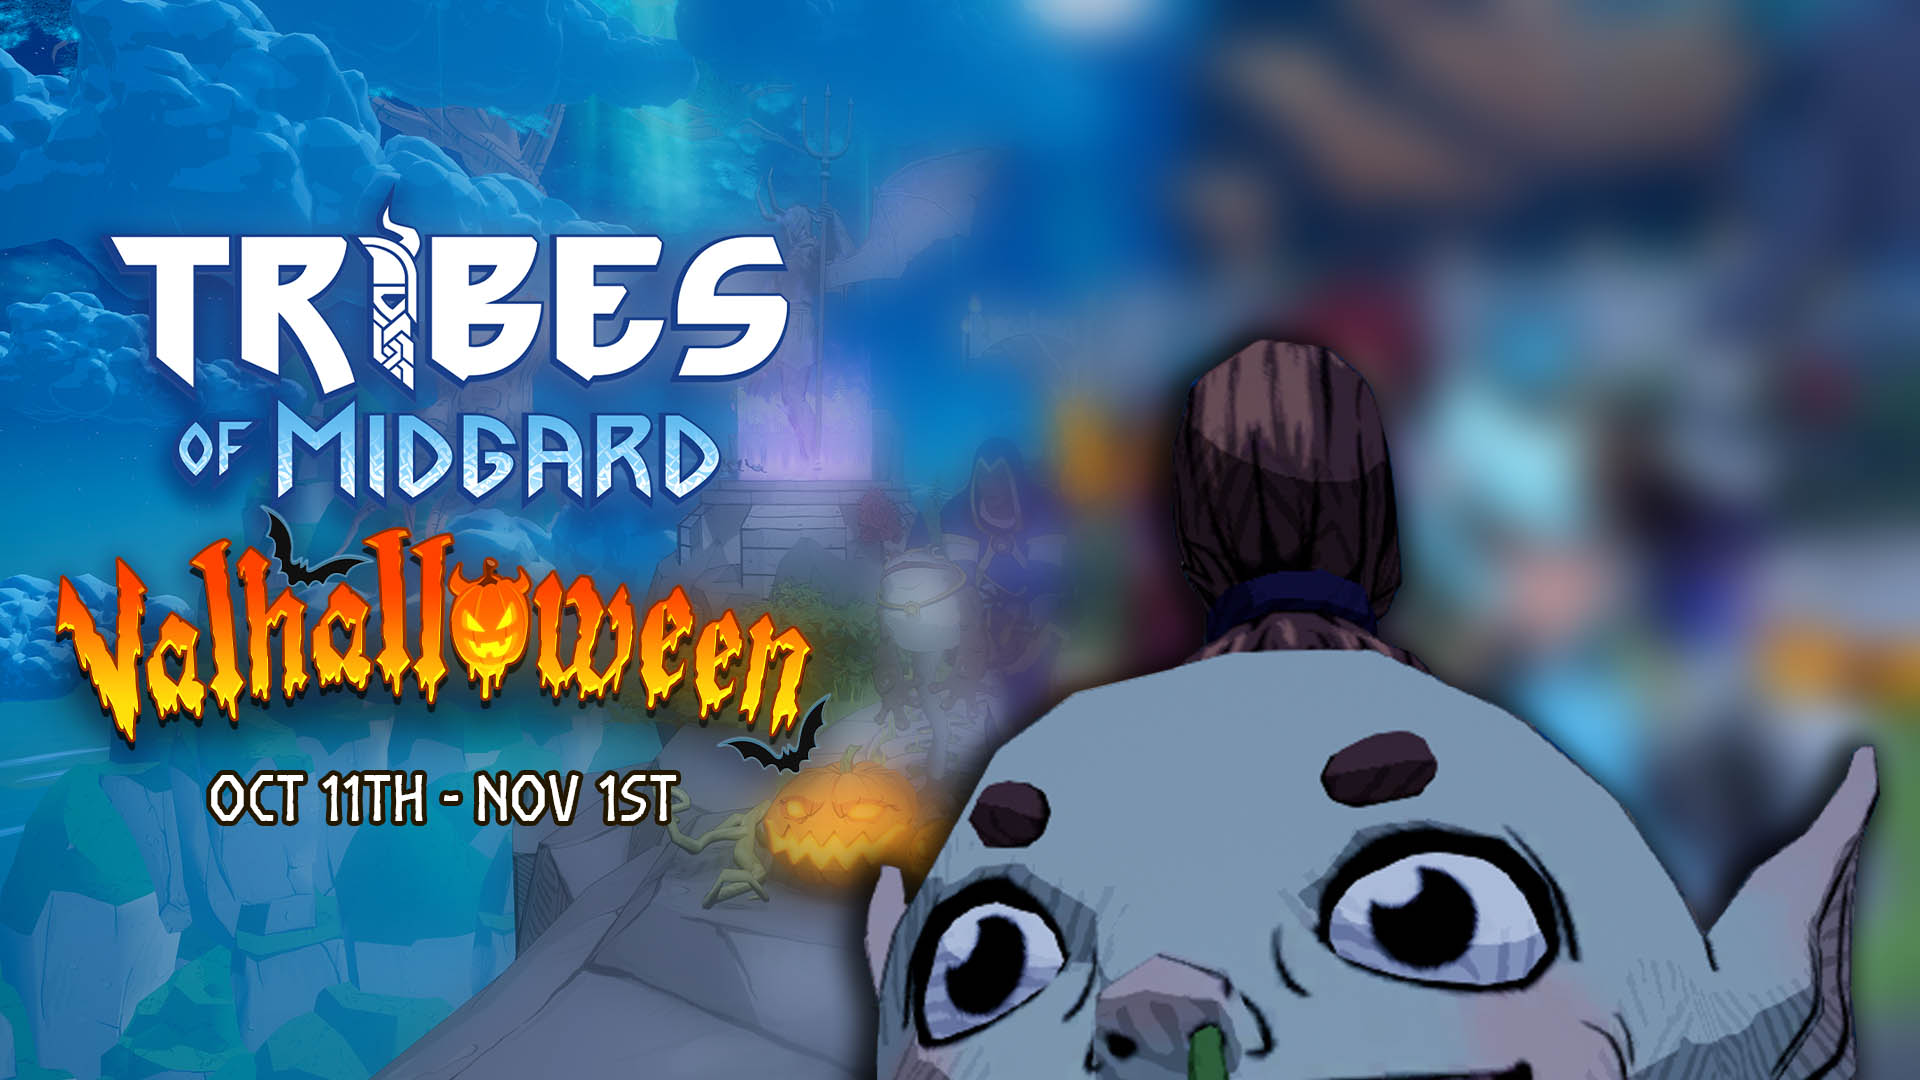 Upcoming Valhalloween Event – Oct 11th to Nov 1st